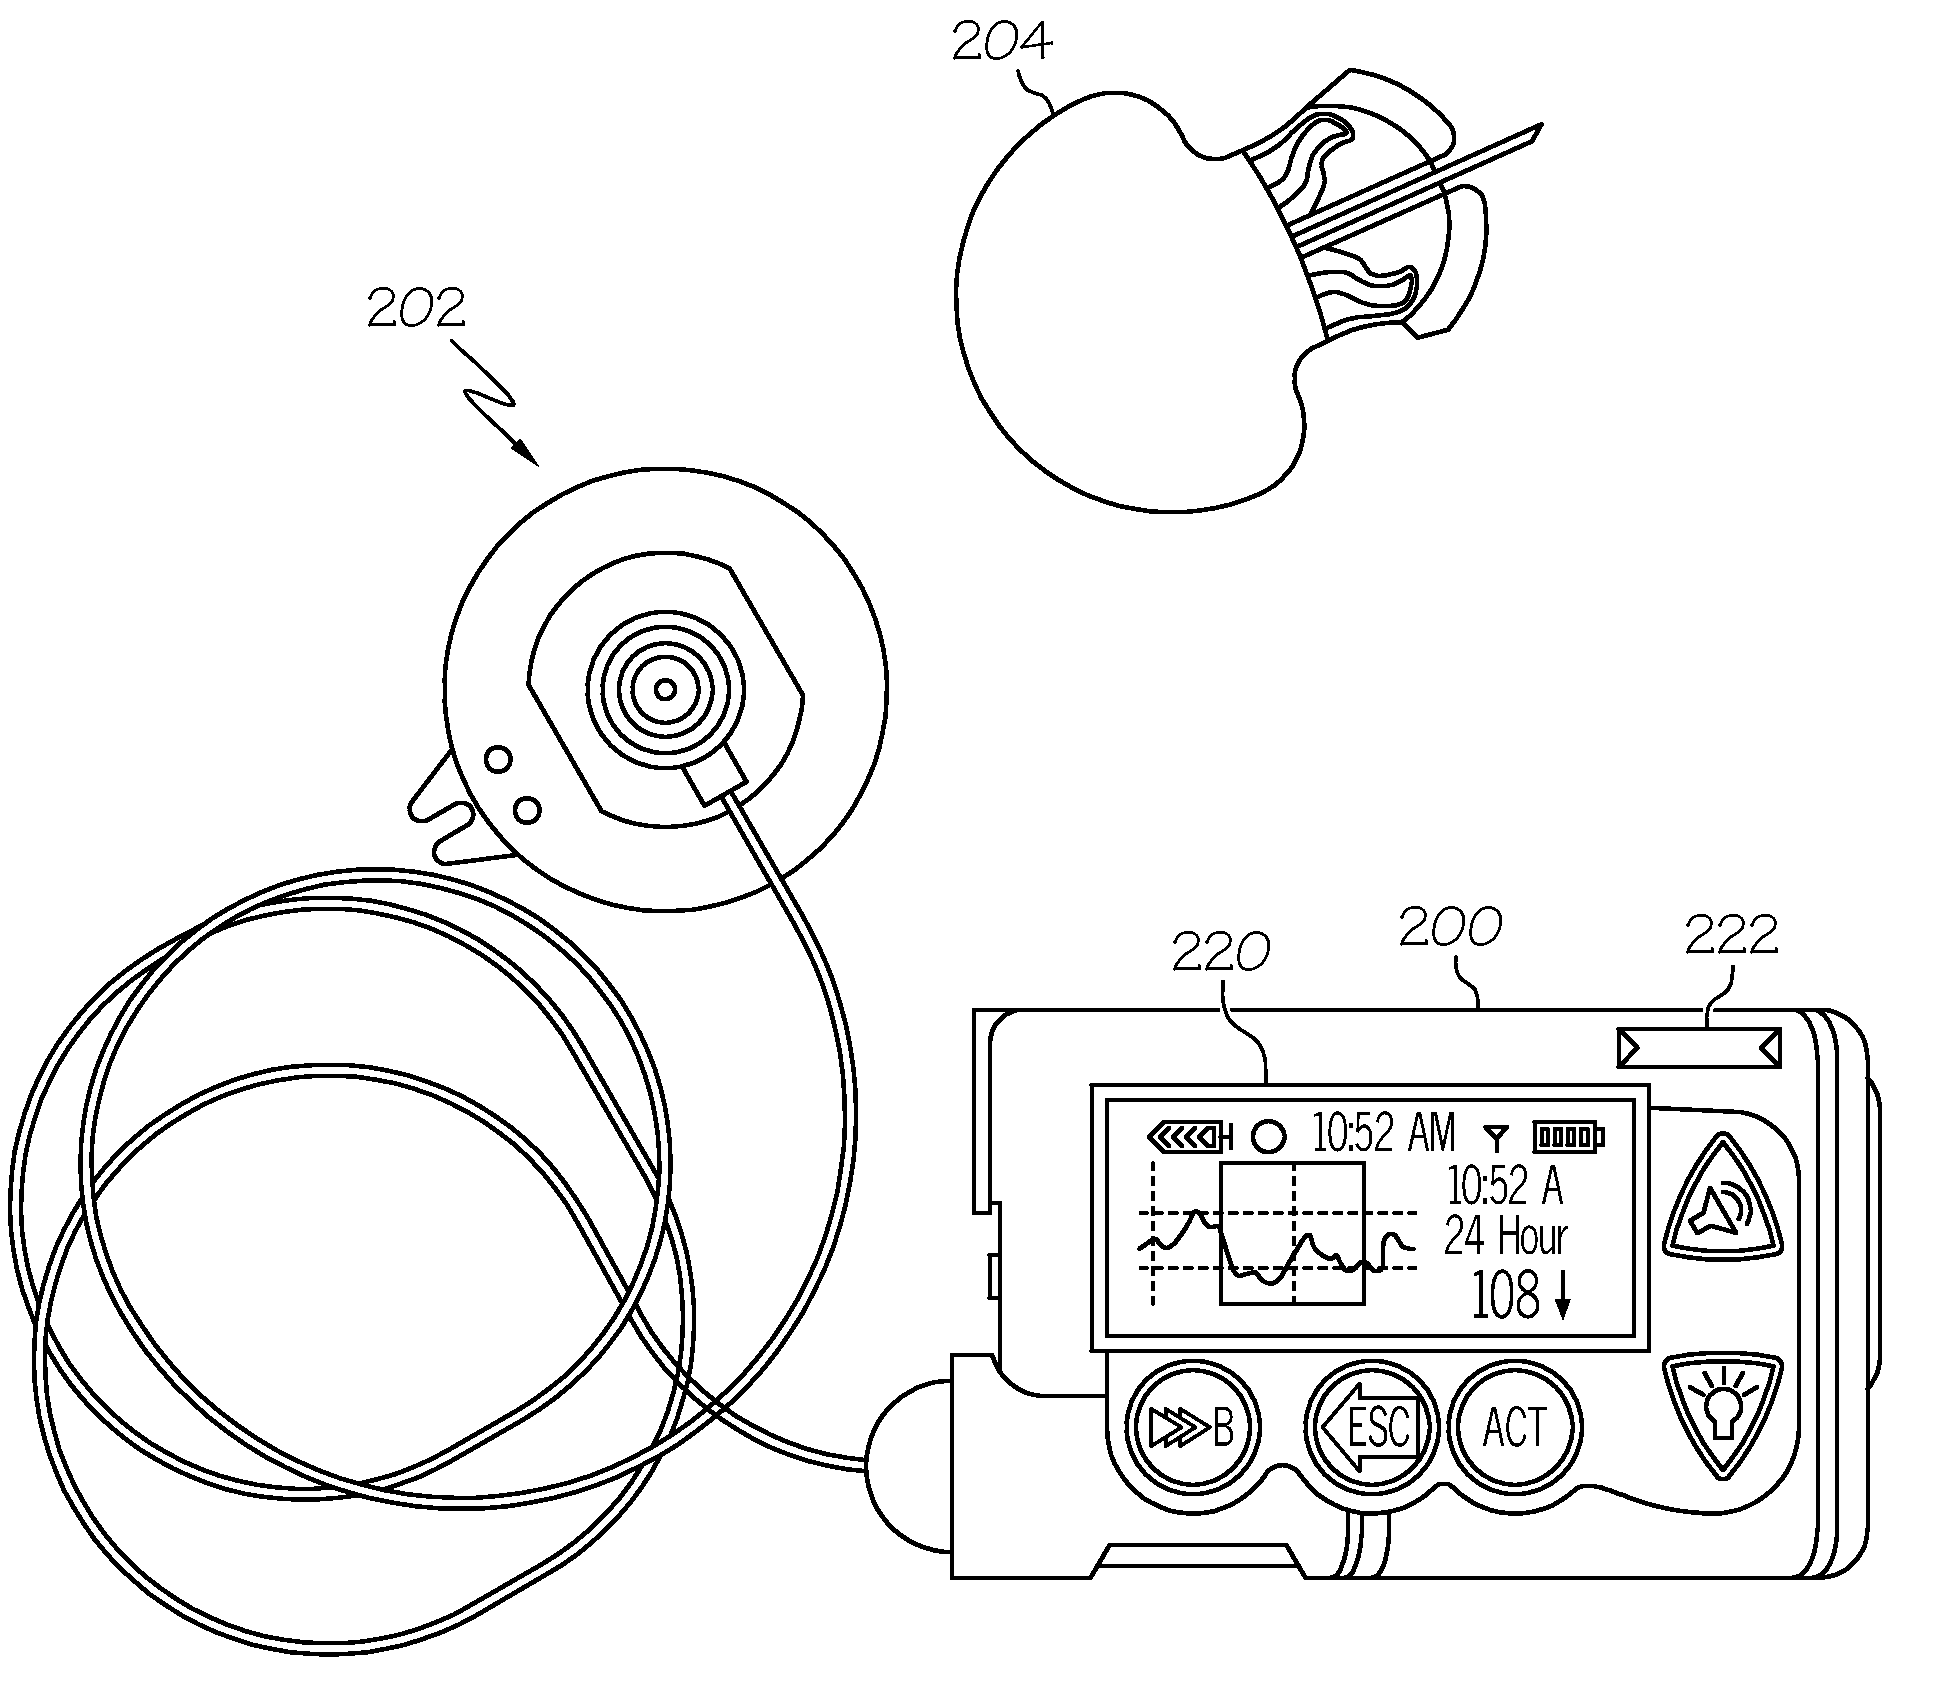 Coordination of control commands in a medical device system having at least one therapy delivery device and at least one wireless controller device